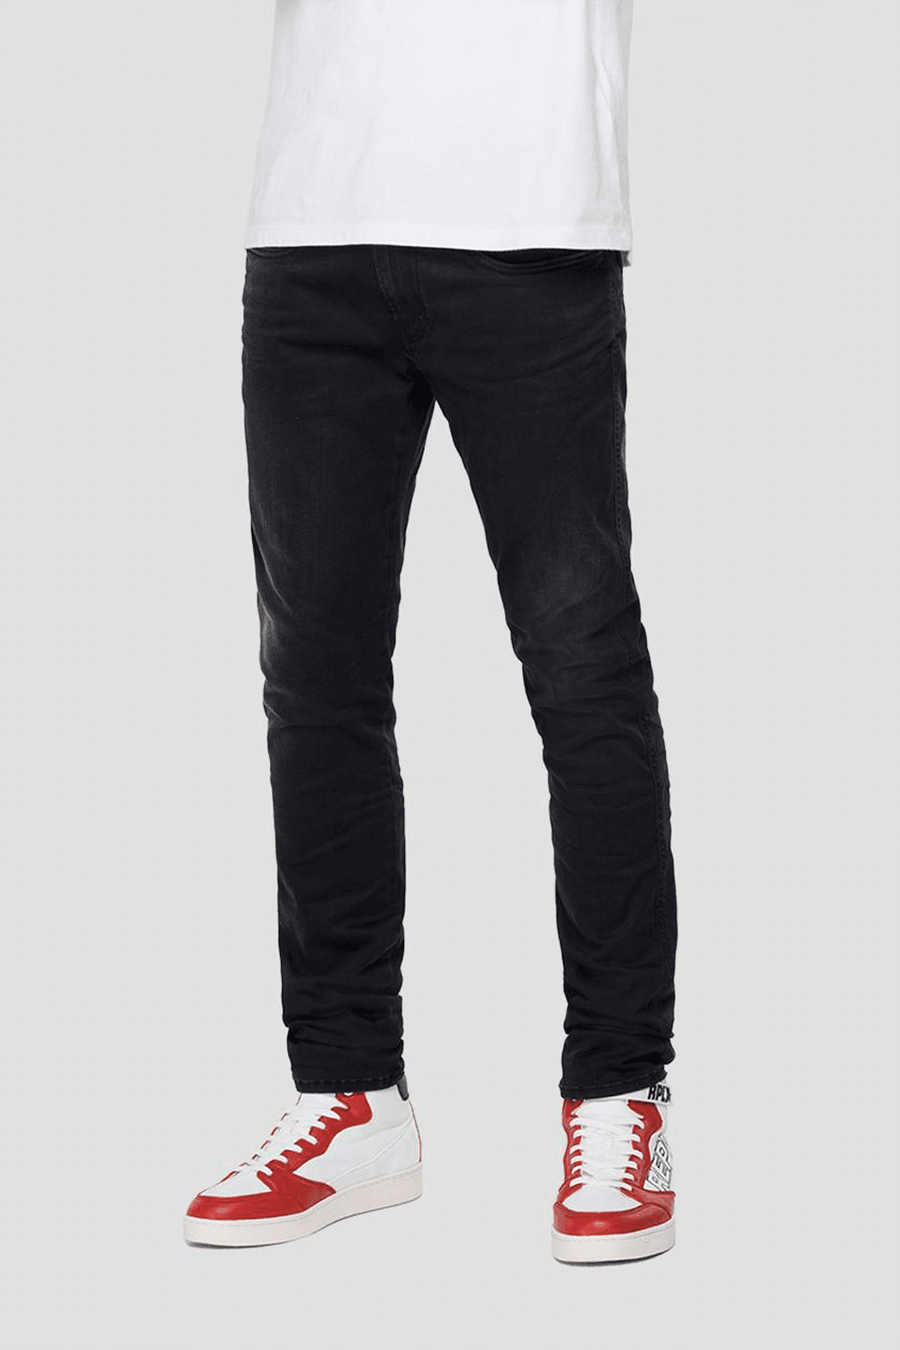 Buy the Replay Hyperflex X-Lite Anbass Jean in Washed Black at Intro. Spend £50 for free UK delivery. Official stockists. We ship worldwide.